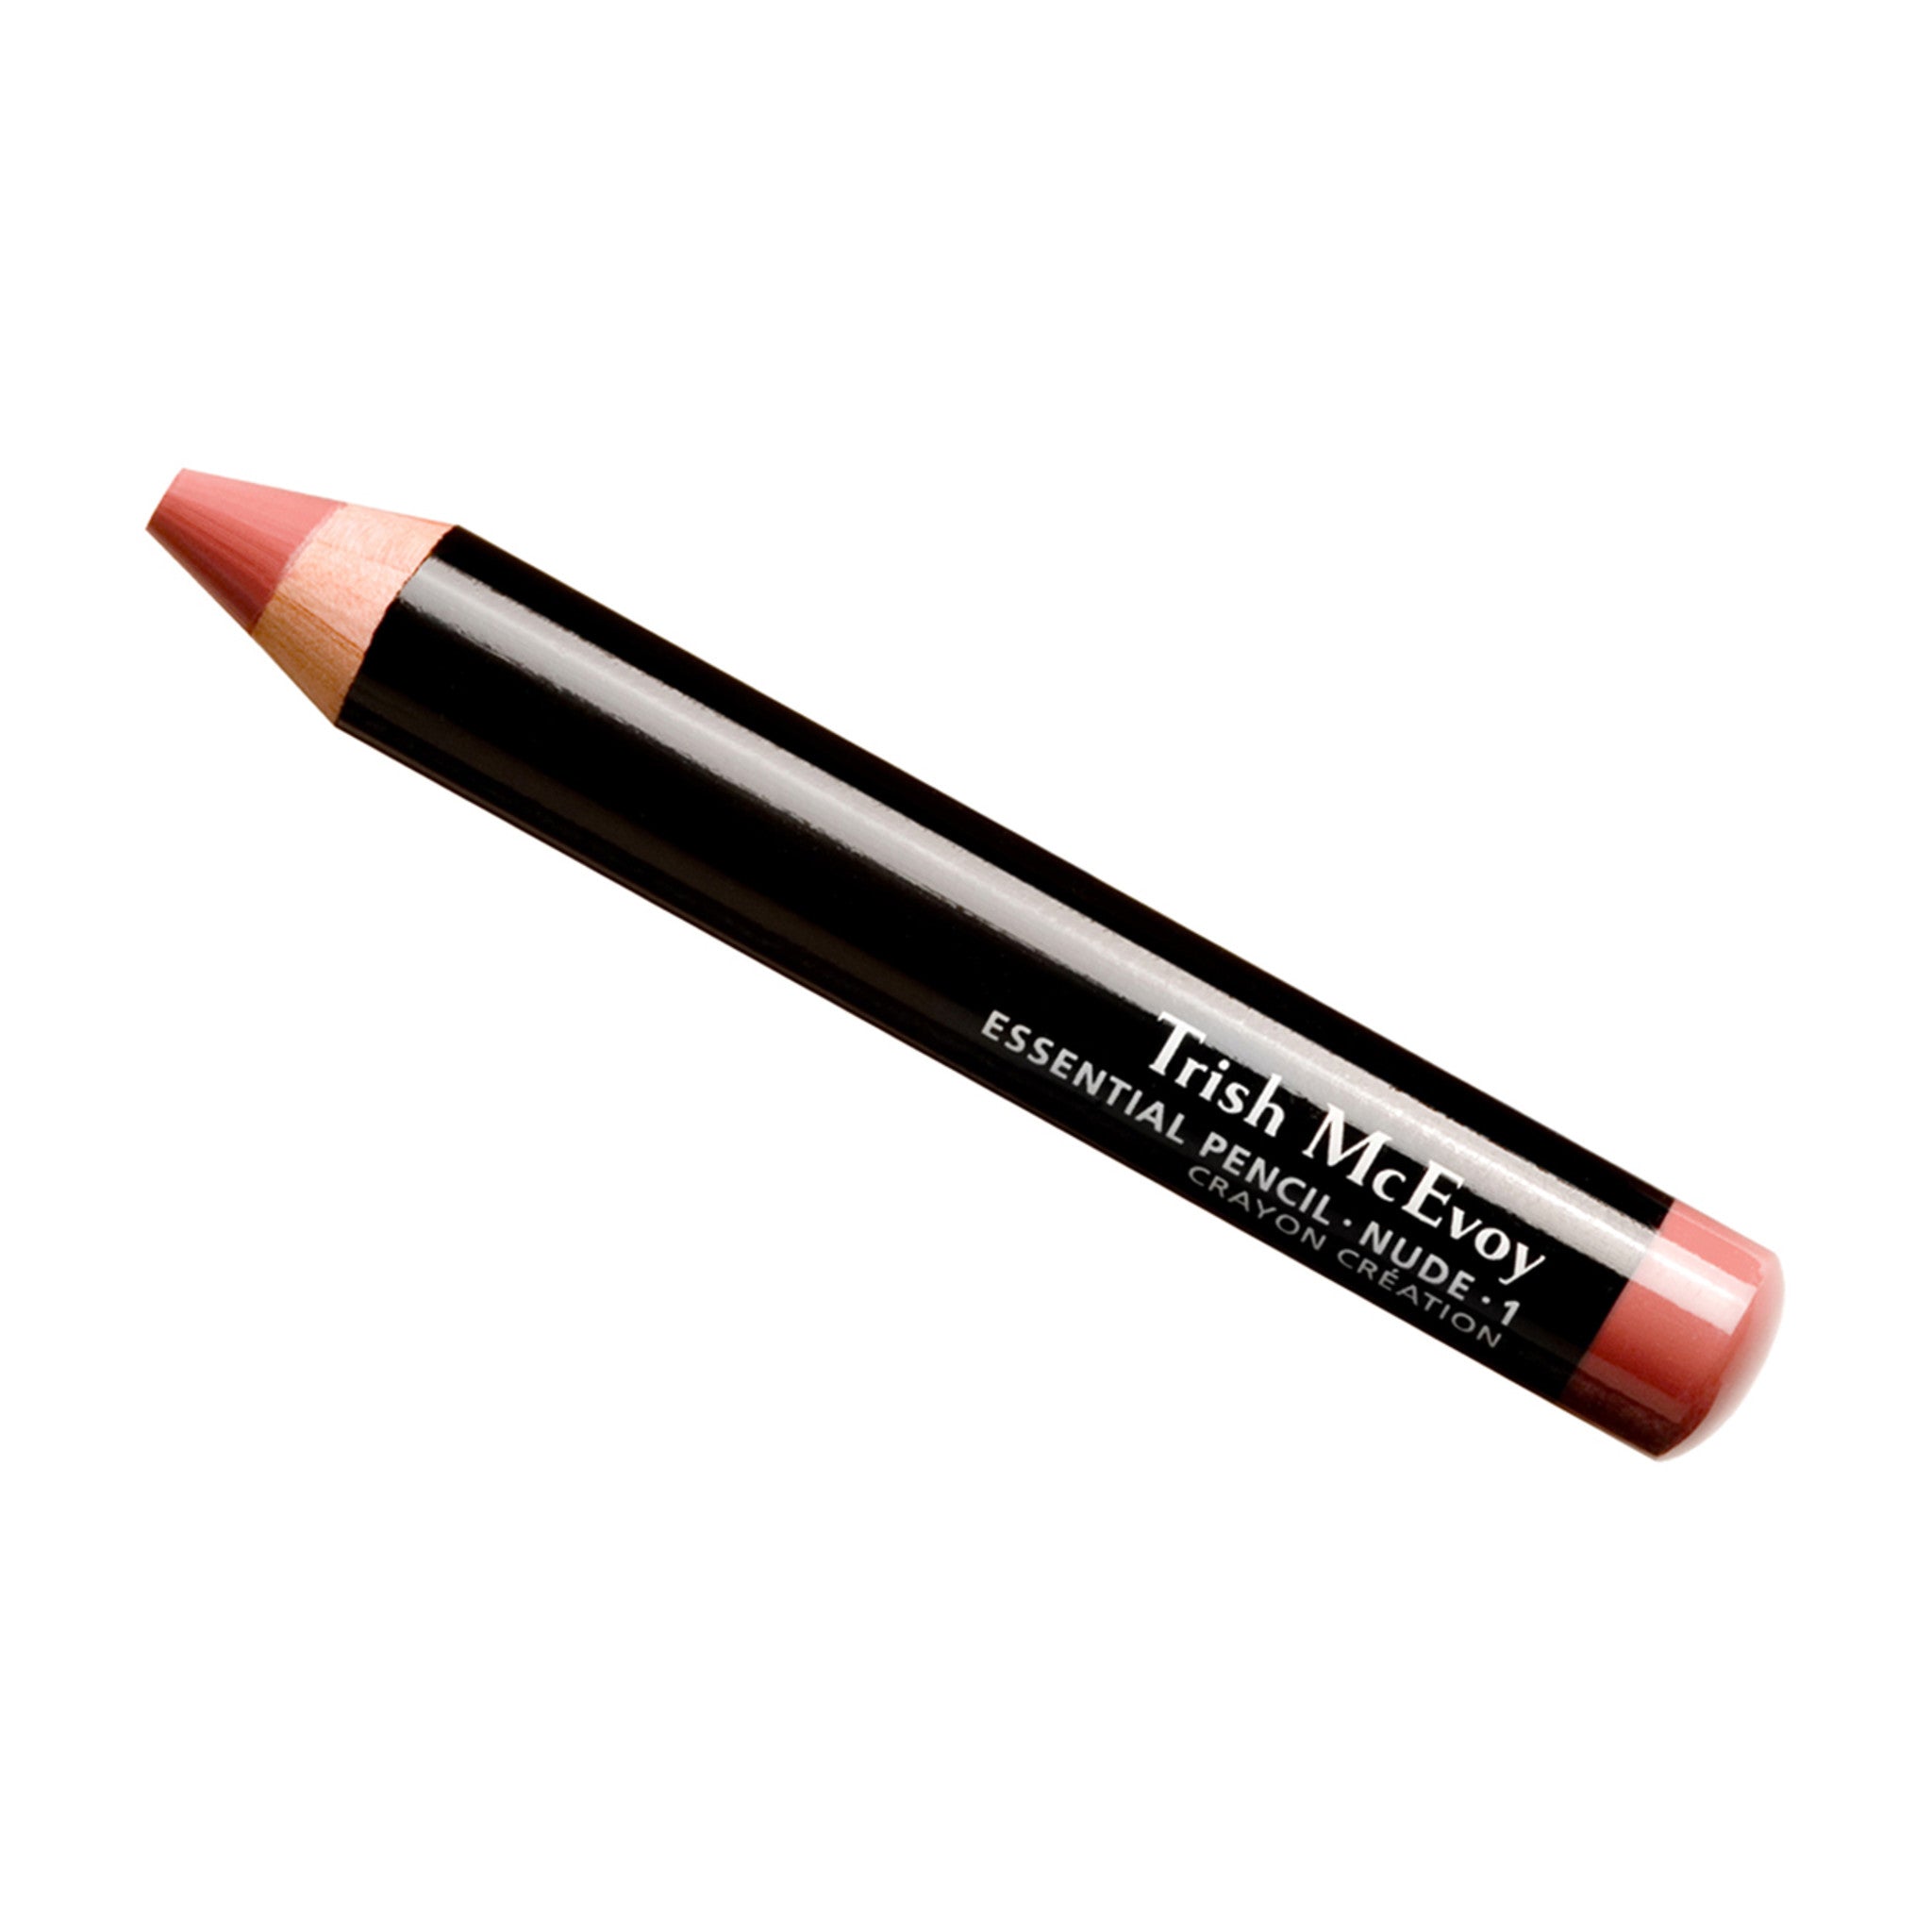 Trish McEvoy Essential Pencil Lip Crayon Color/Shade variant: Nude main image. This product is in the color nude